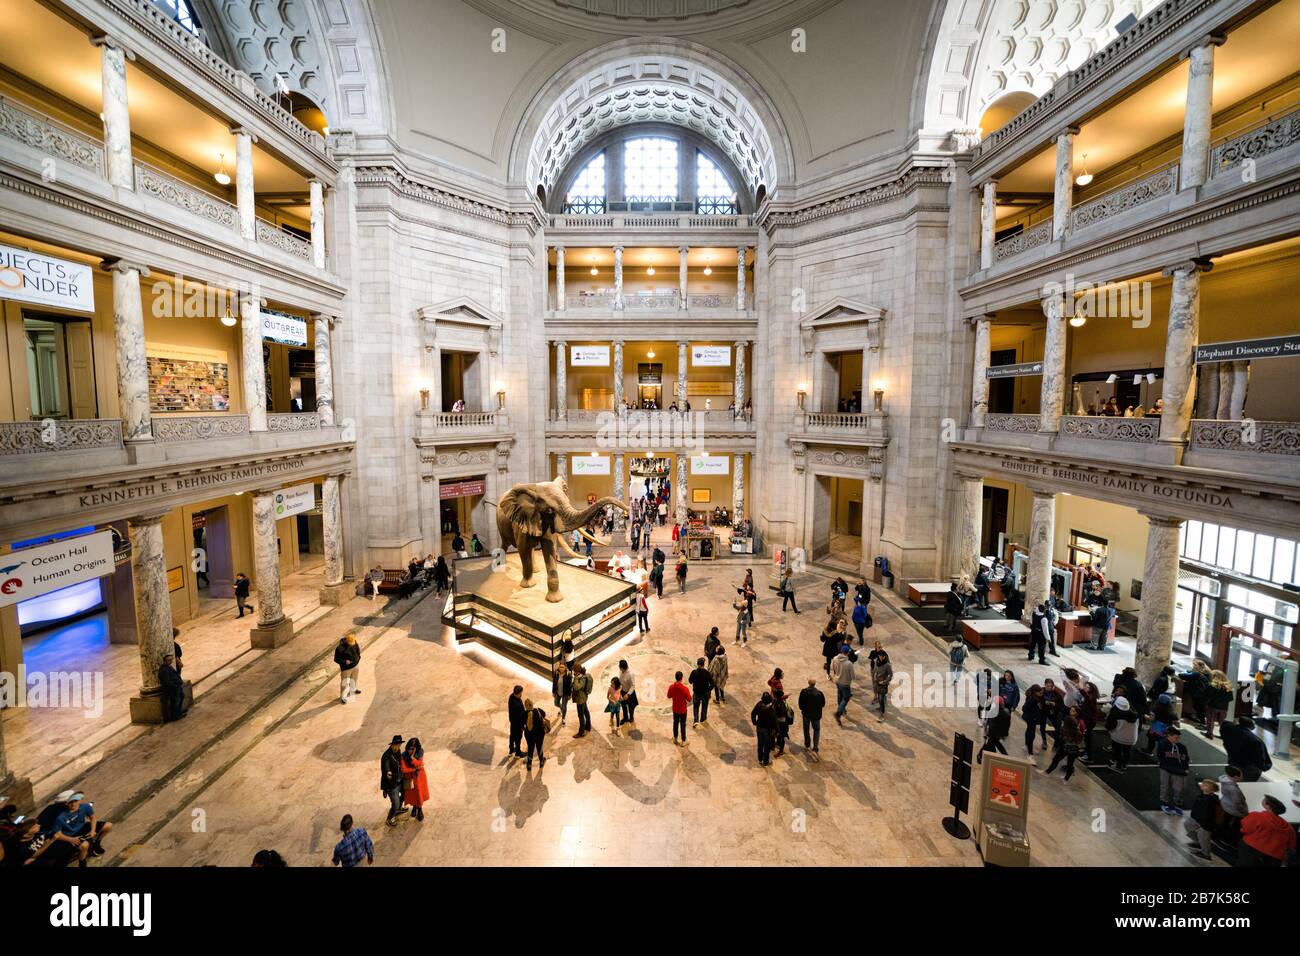 WASHINGTON, DC - The main hall of the Smithsonian Institution's National Museum of Natural History on the National Mall in Washington DC. Stock Photo